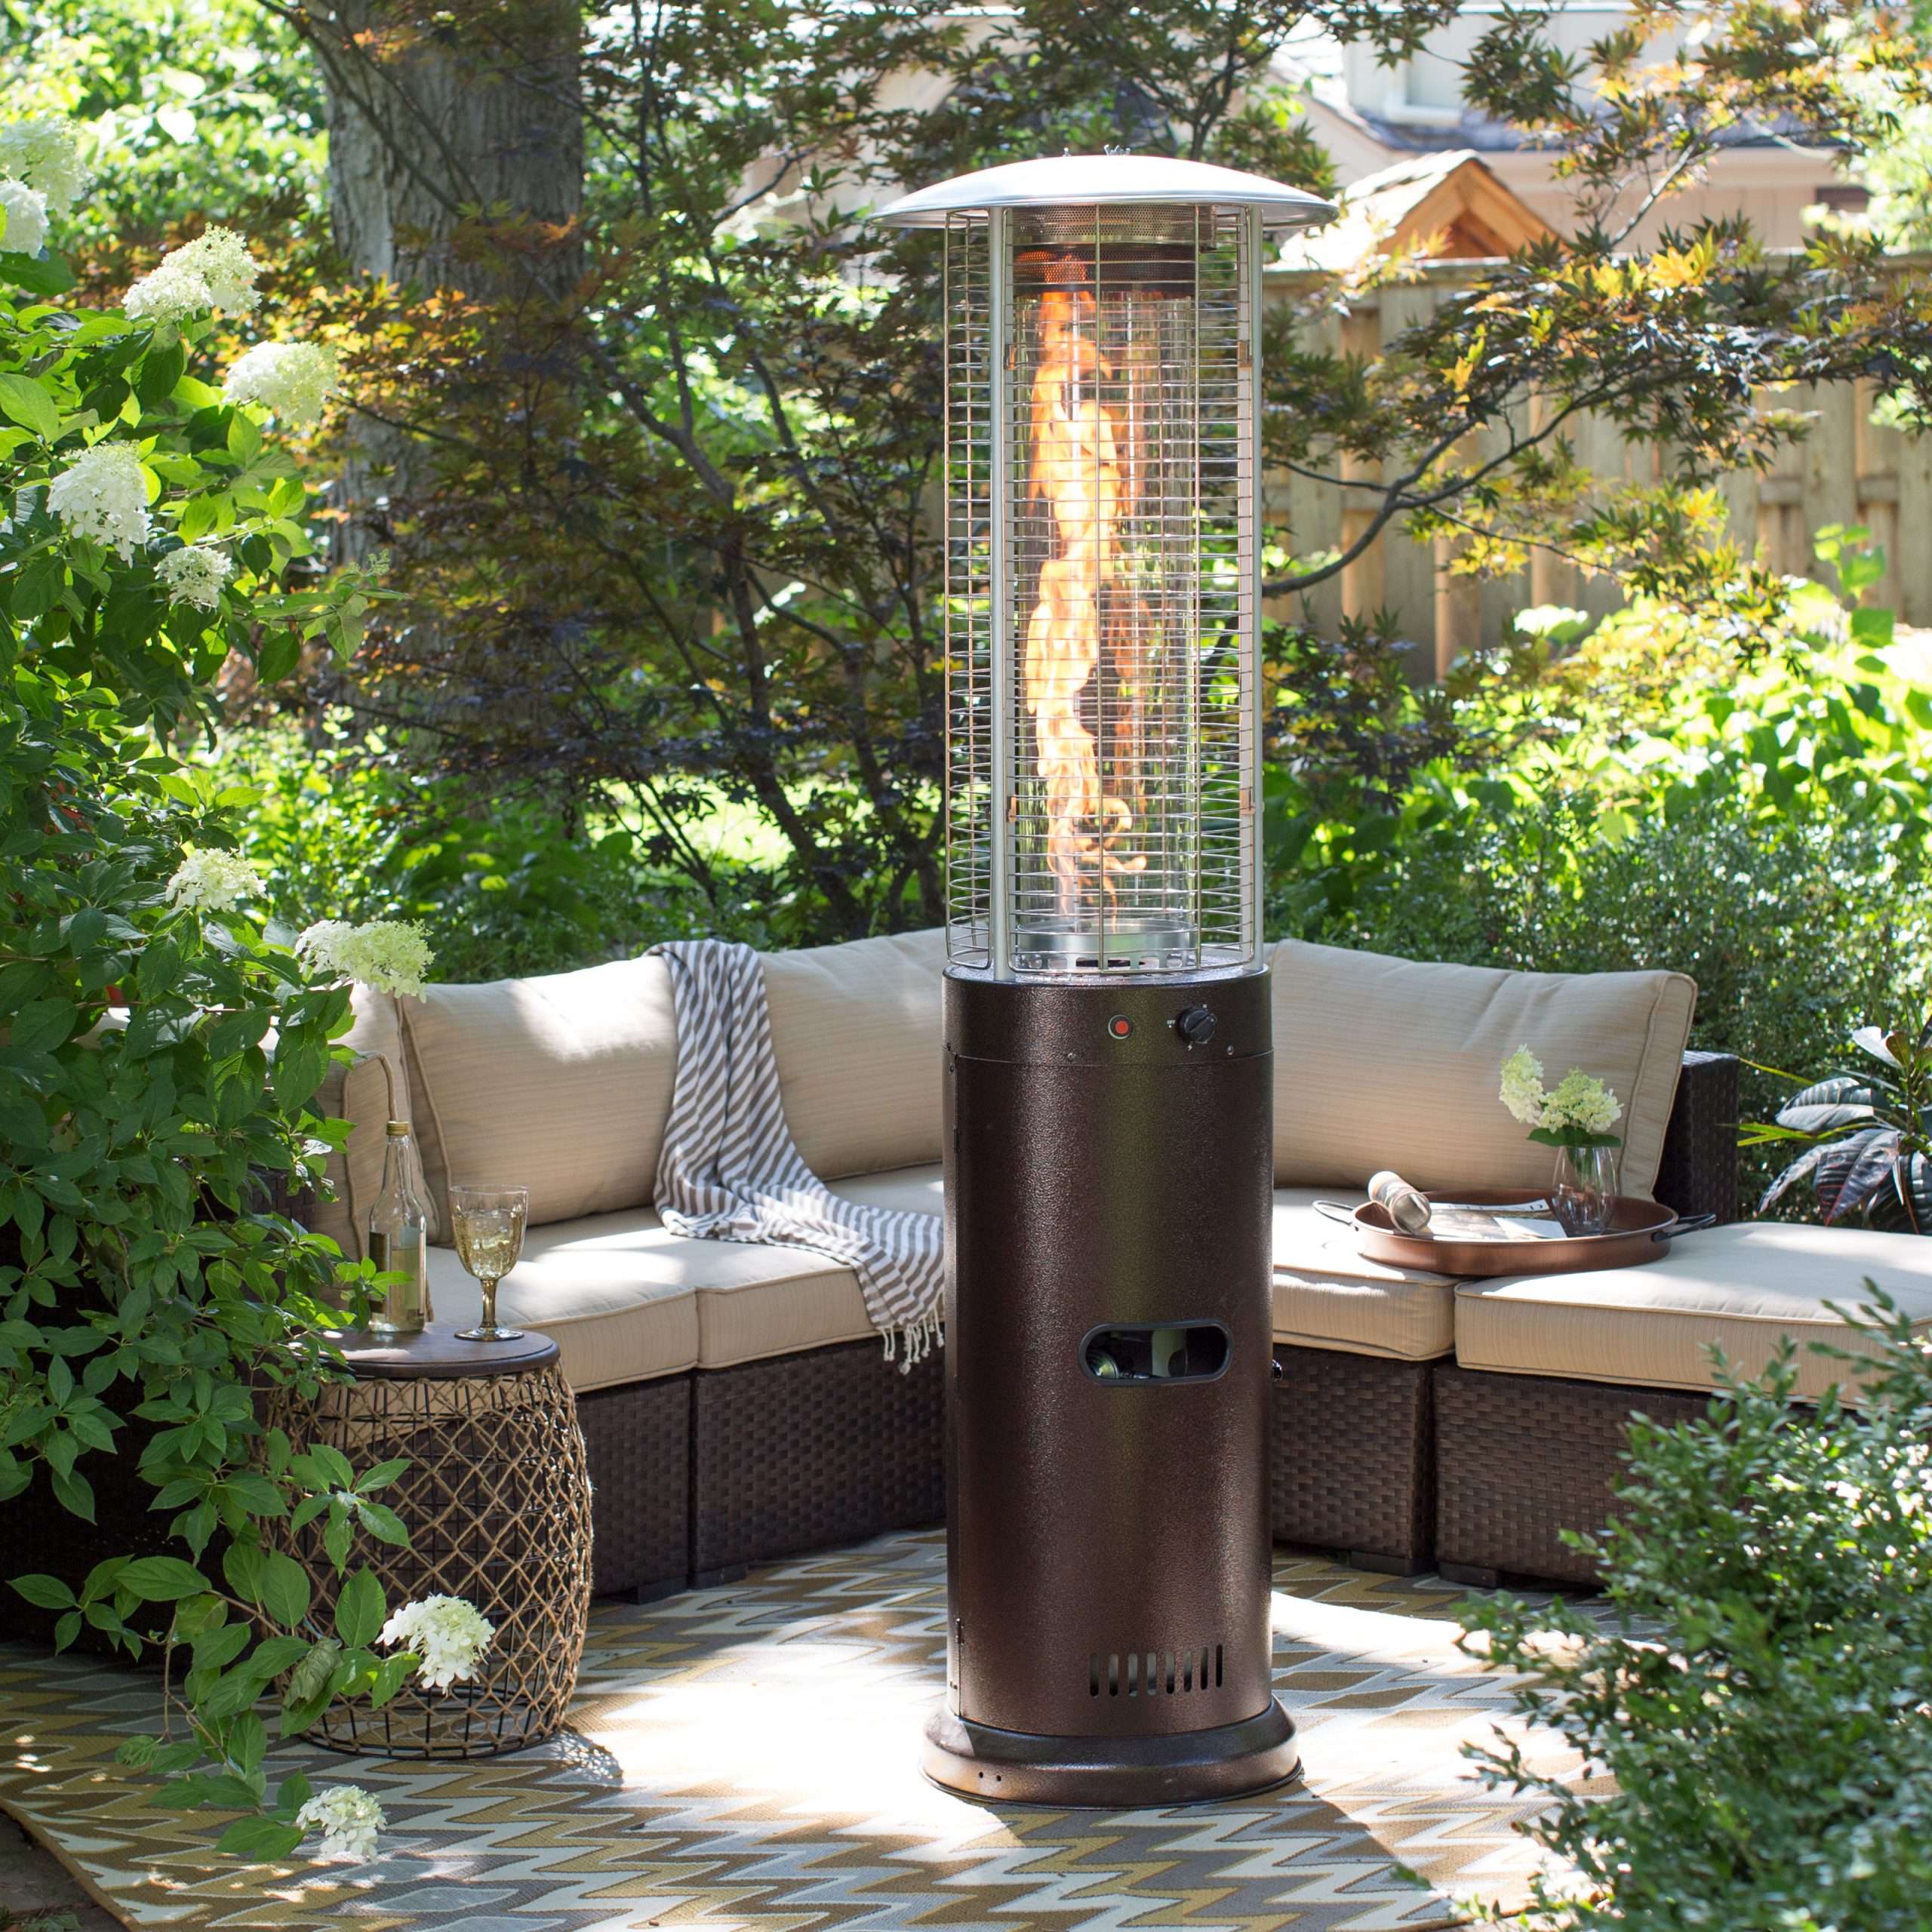 Red Ember Fuego Patio Heater